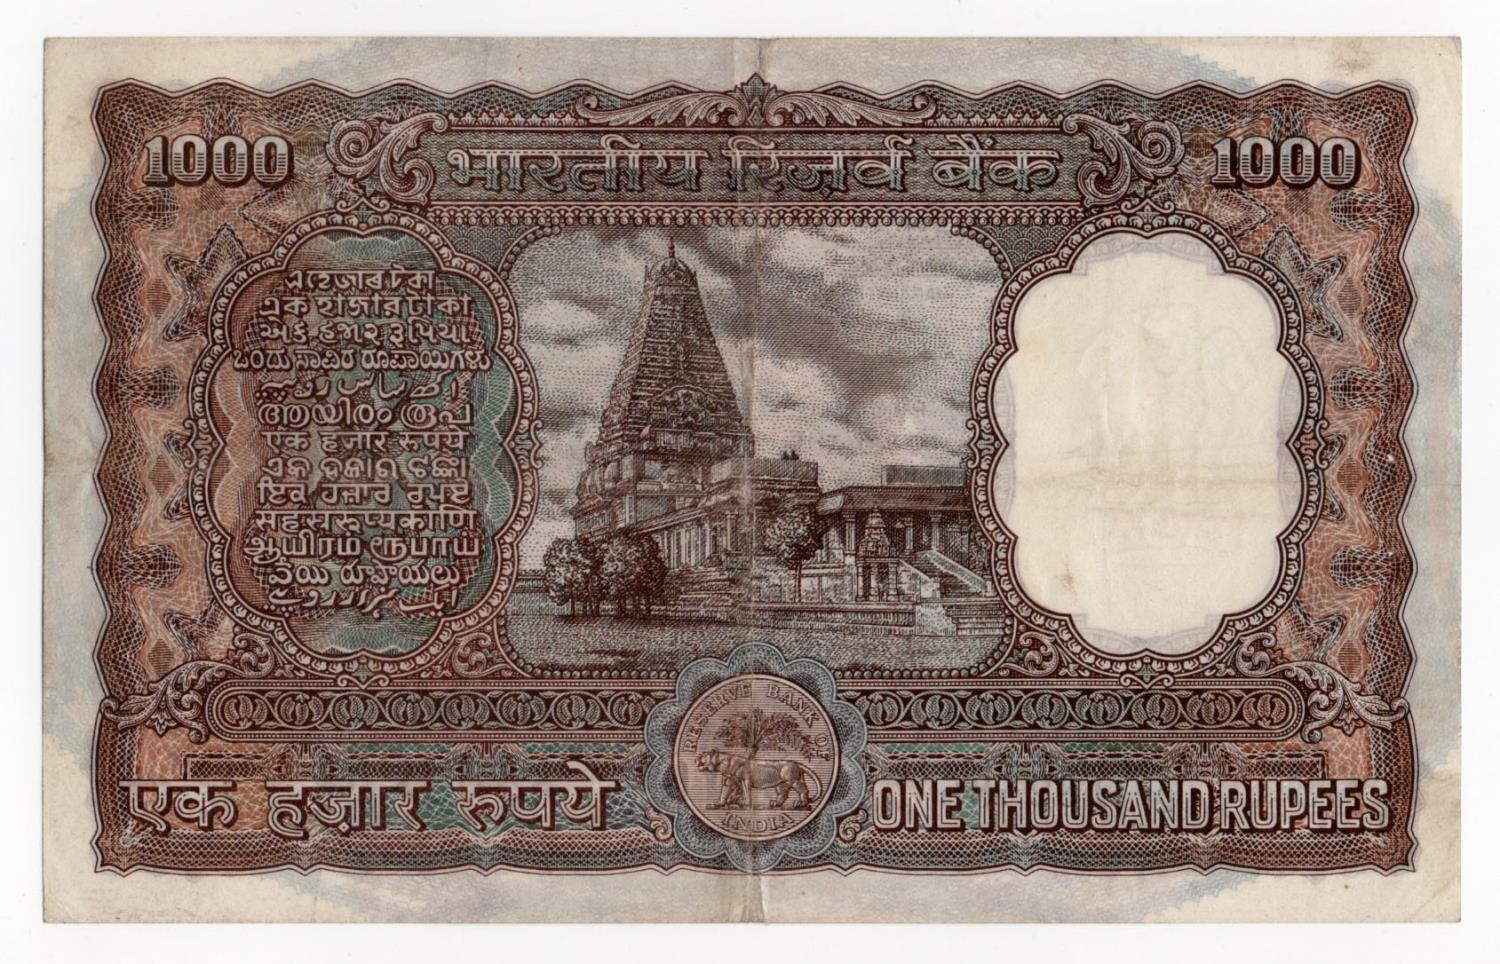 India 1000 Rupees Reserve Bank Bombay issue 1975, signature 79 N.C. Sengupta, serial A/2 182585 (BNB - Image 2 of 2